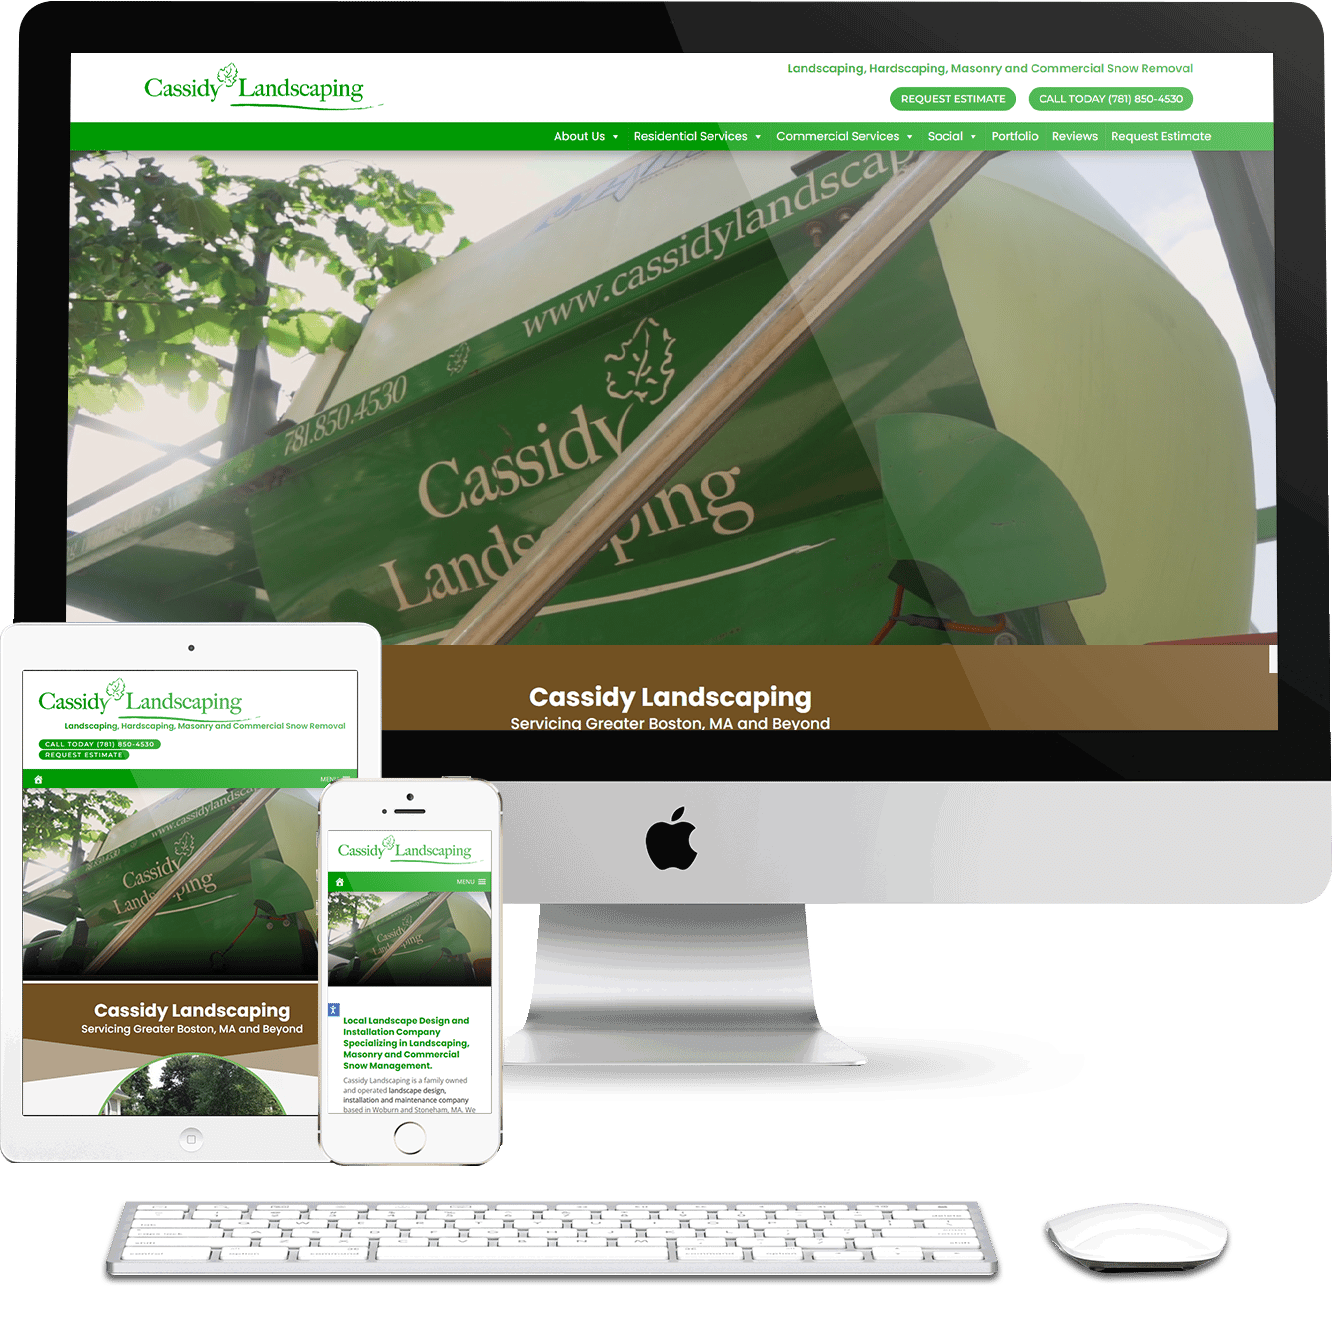 Cassidy Landscaping